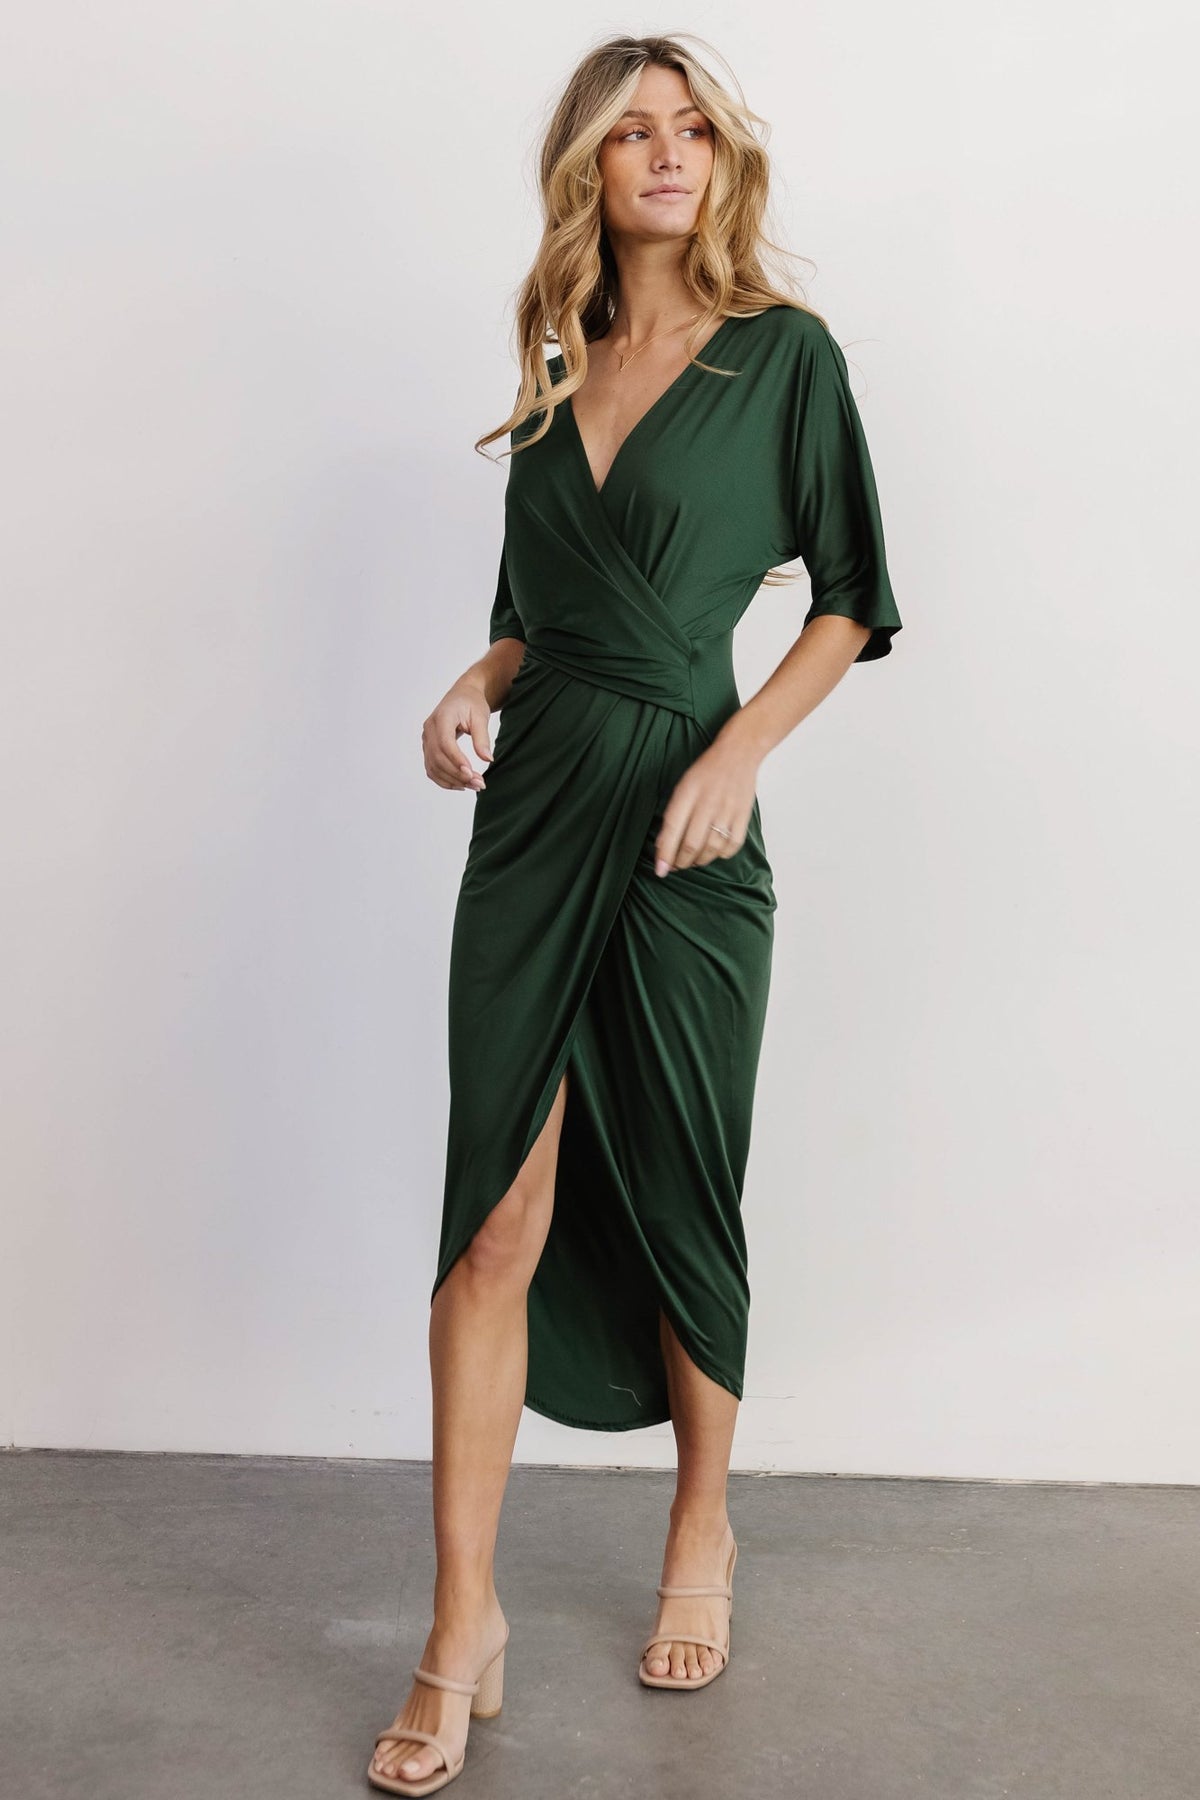 rouched dress